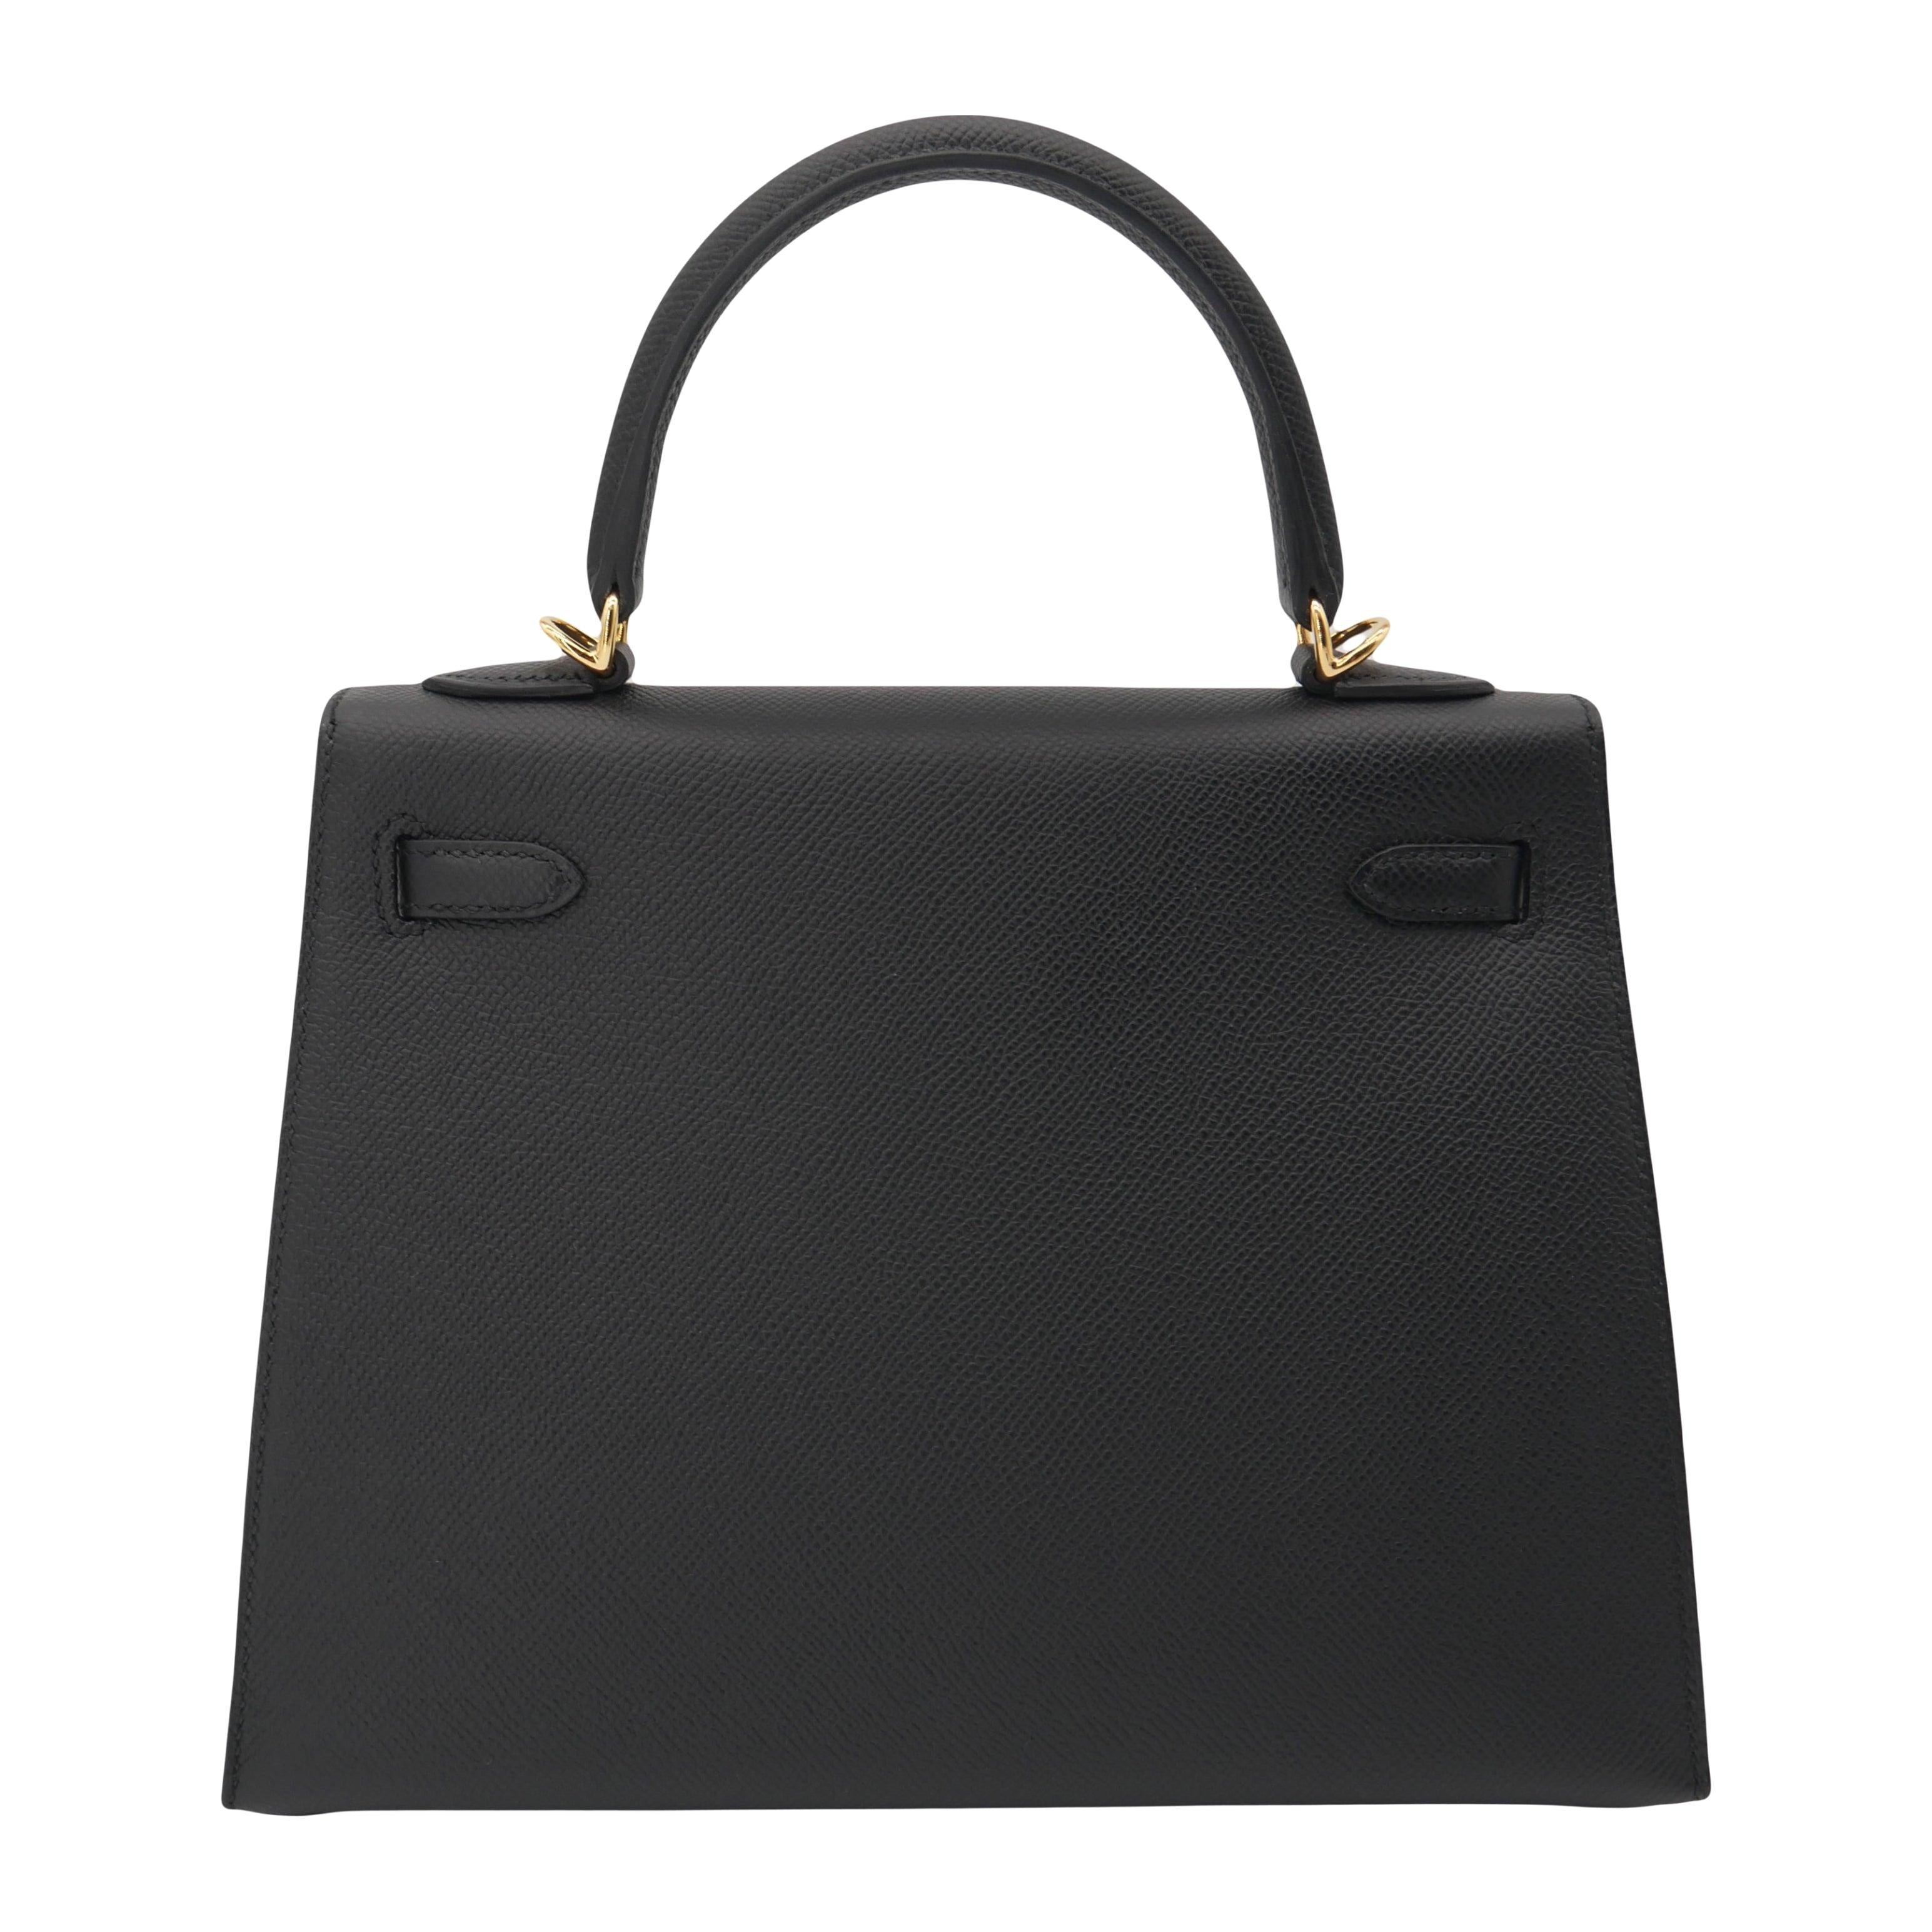 Hermès 25cm Kelly Sellier Black Epsom Leather Gold Hardware In New Condition For Sale In Santa Rosa Beach, FL